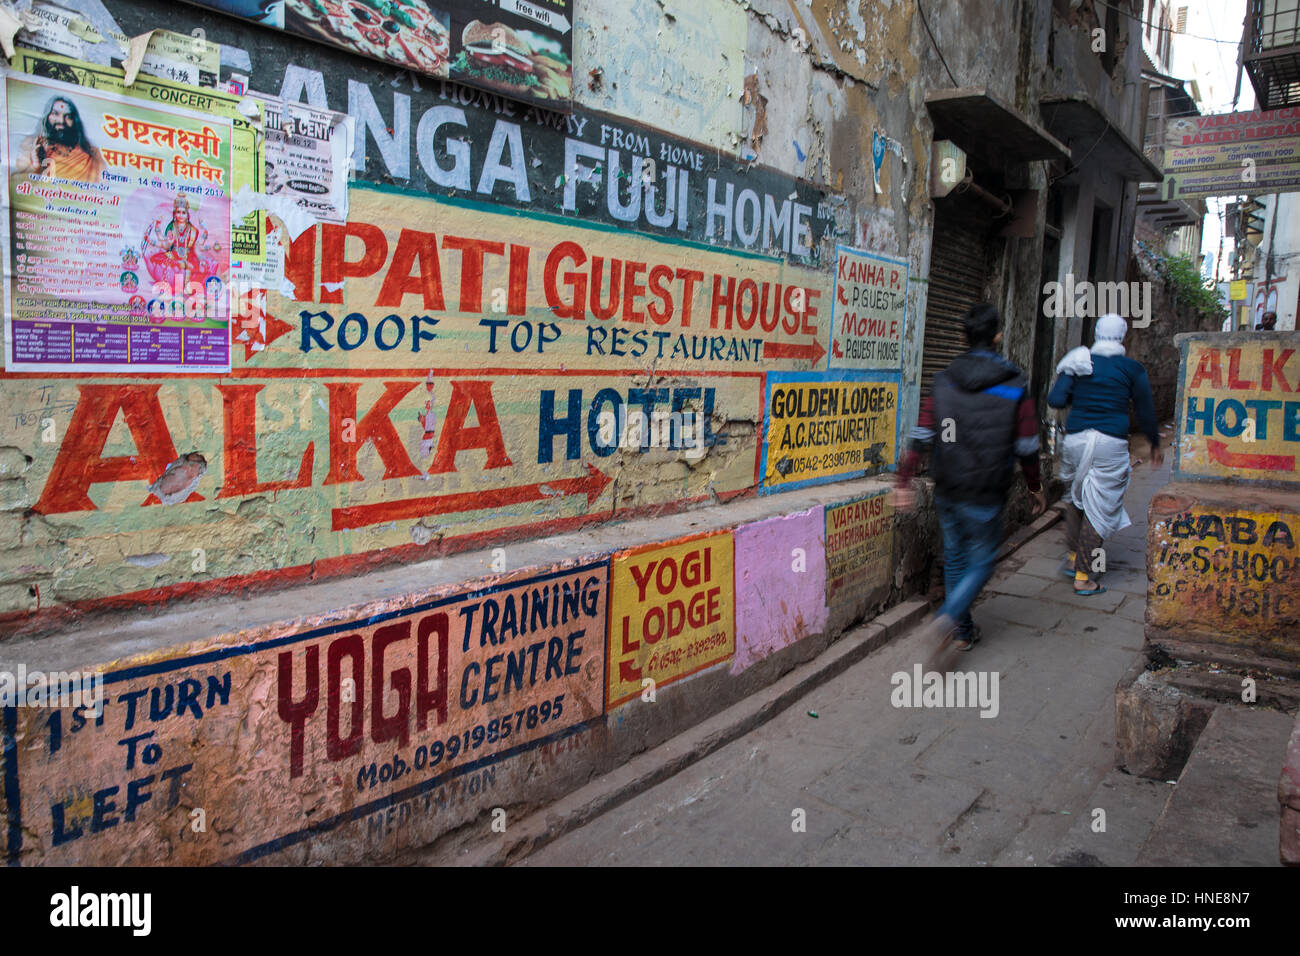 Hand painted signs advertising yoga lodges, music schools and restaurants in Varanasi, India, one of the country's most popular tourist destinations. Stock Photo